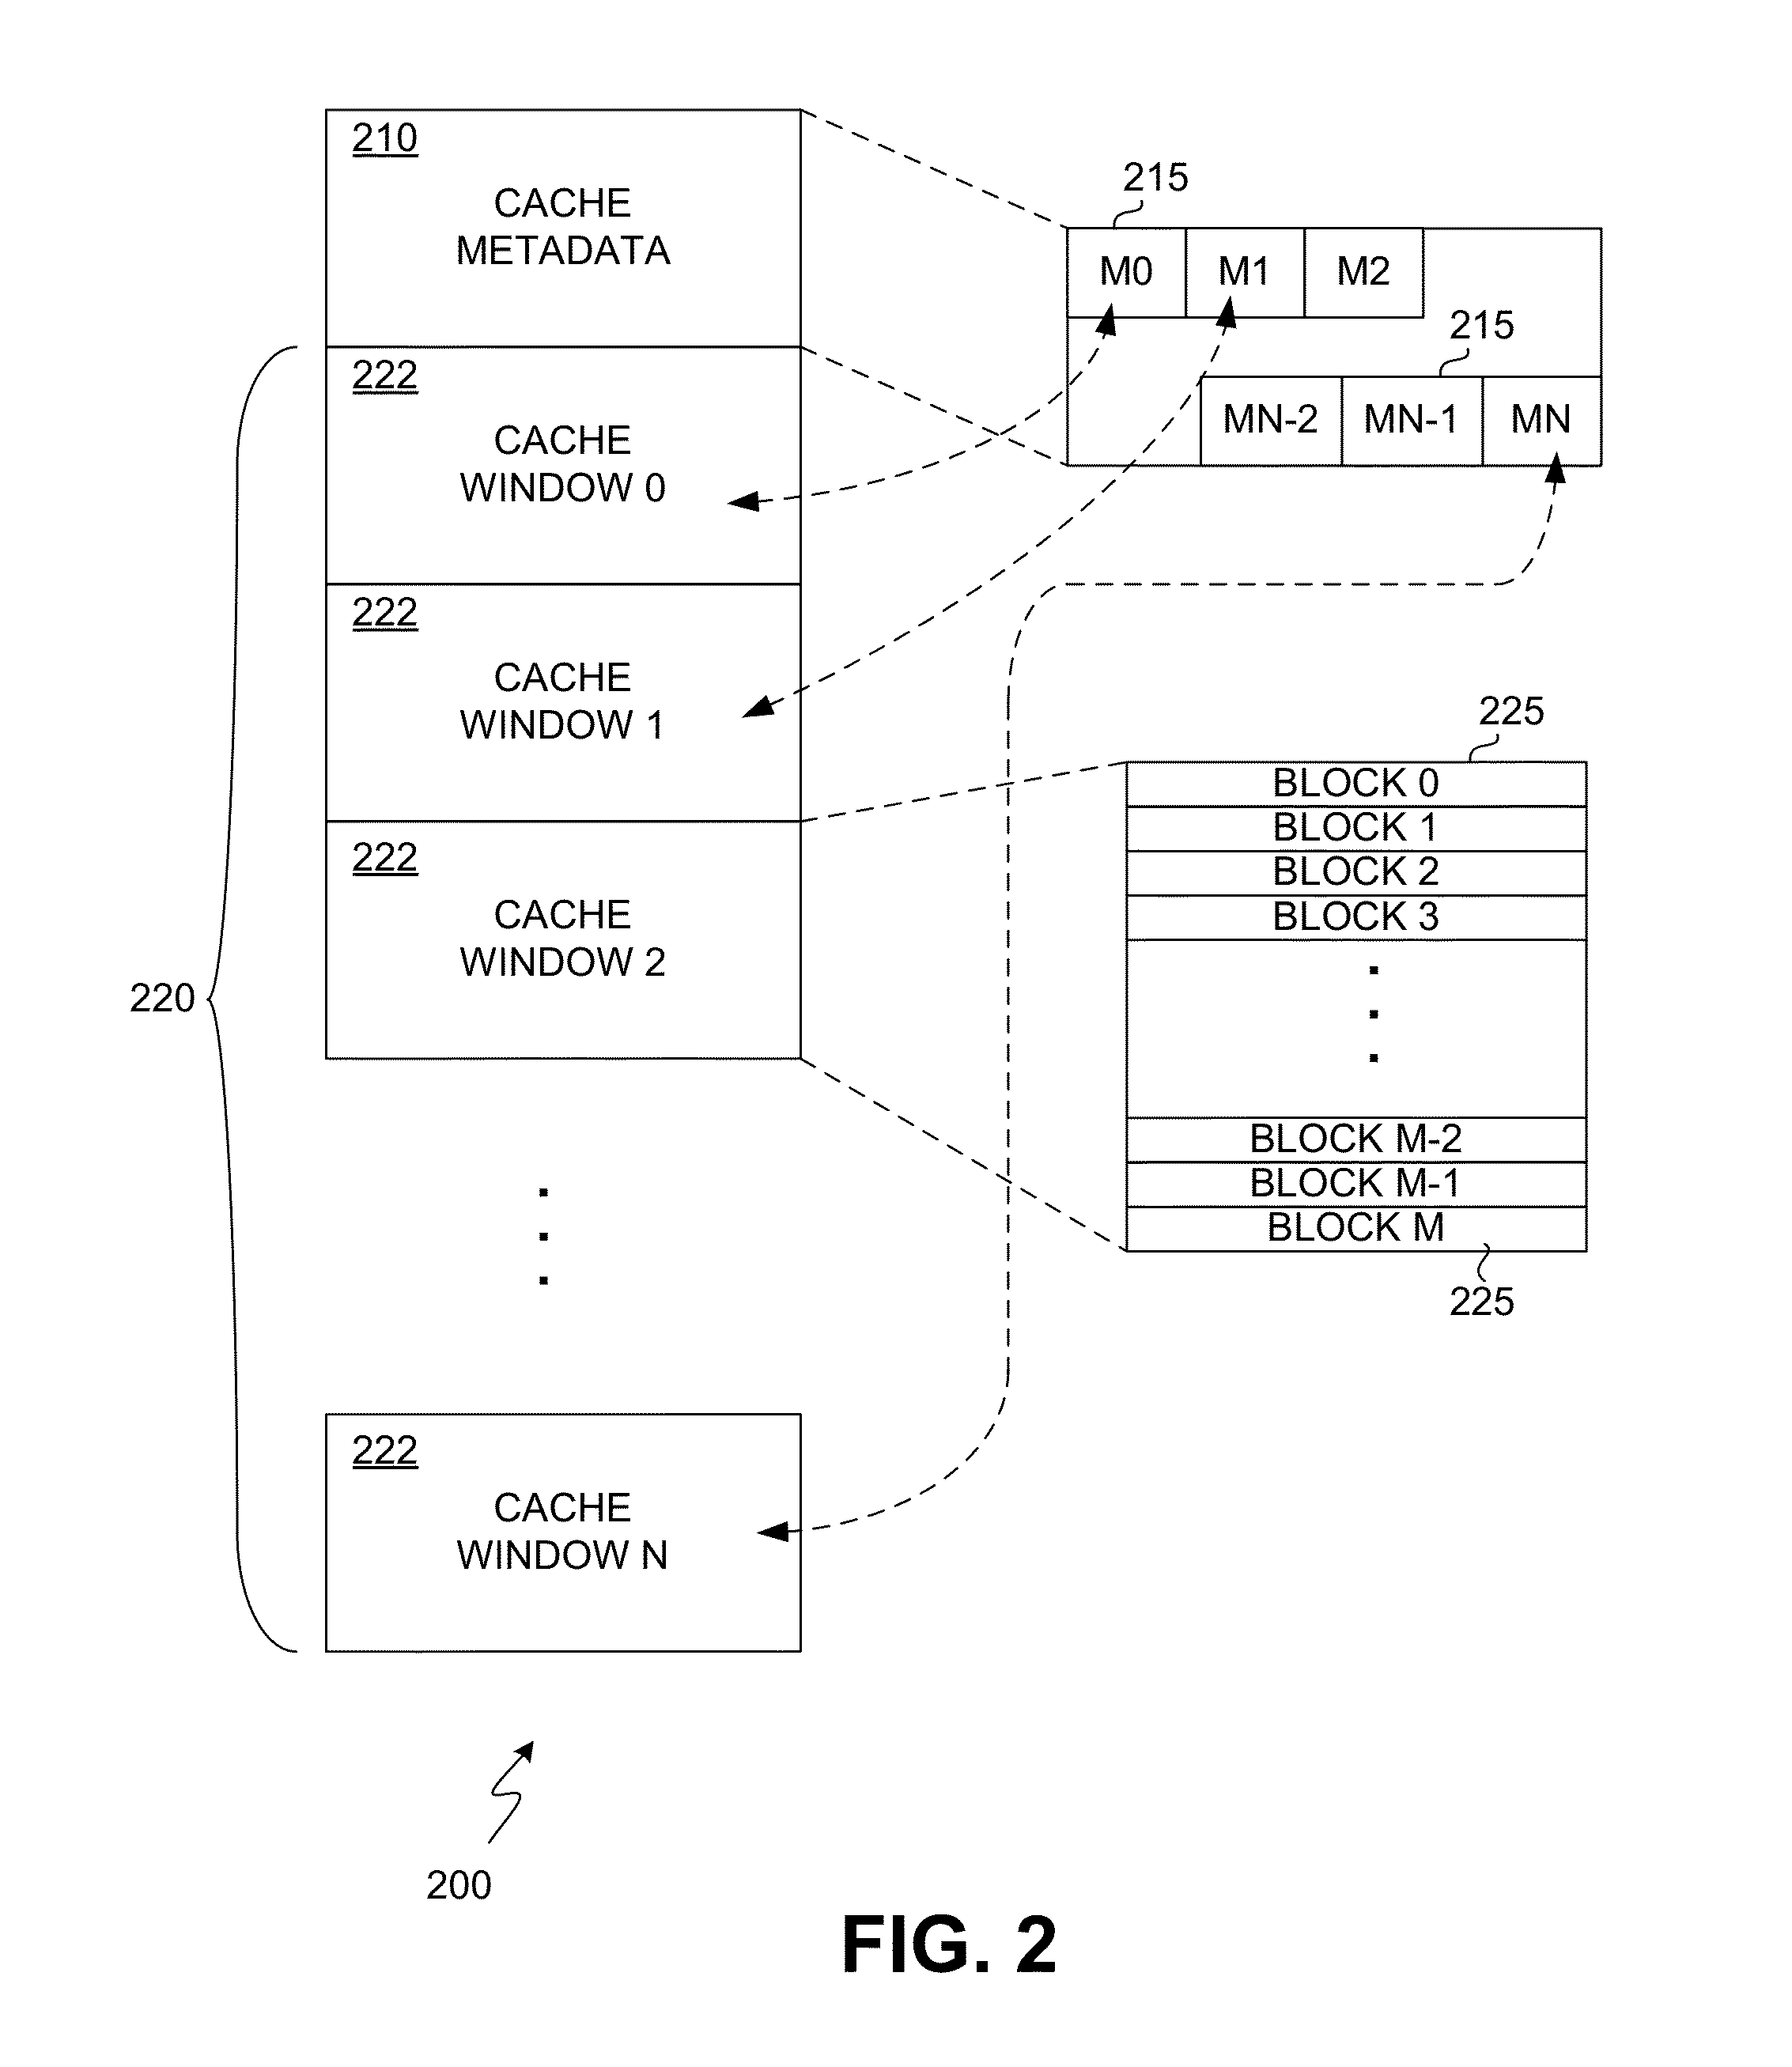 System, method and computer-readable medium for dynamic cache sharing in a flash-based caching solution supporting virtual machines